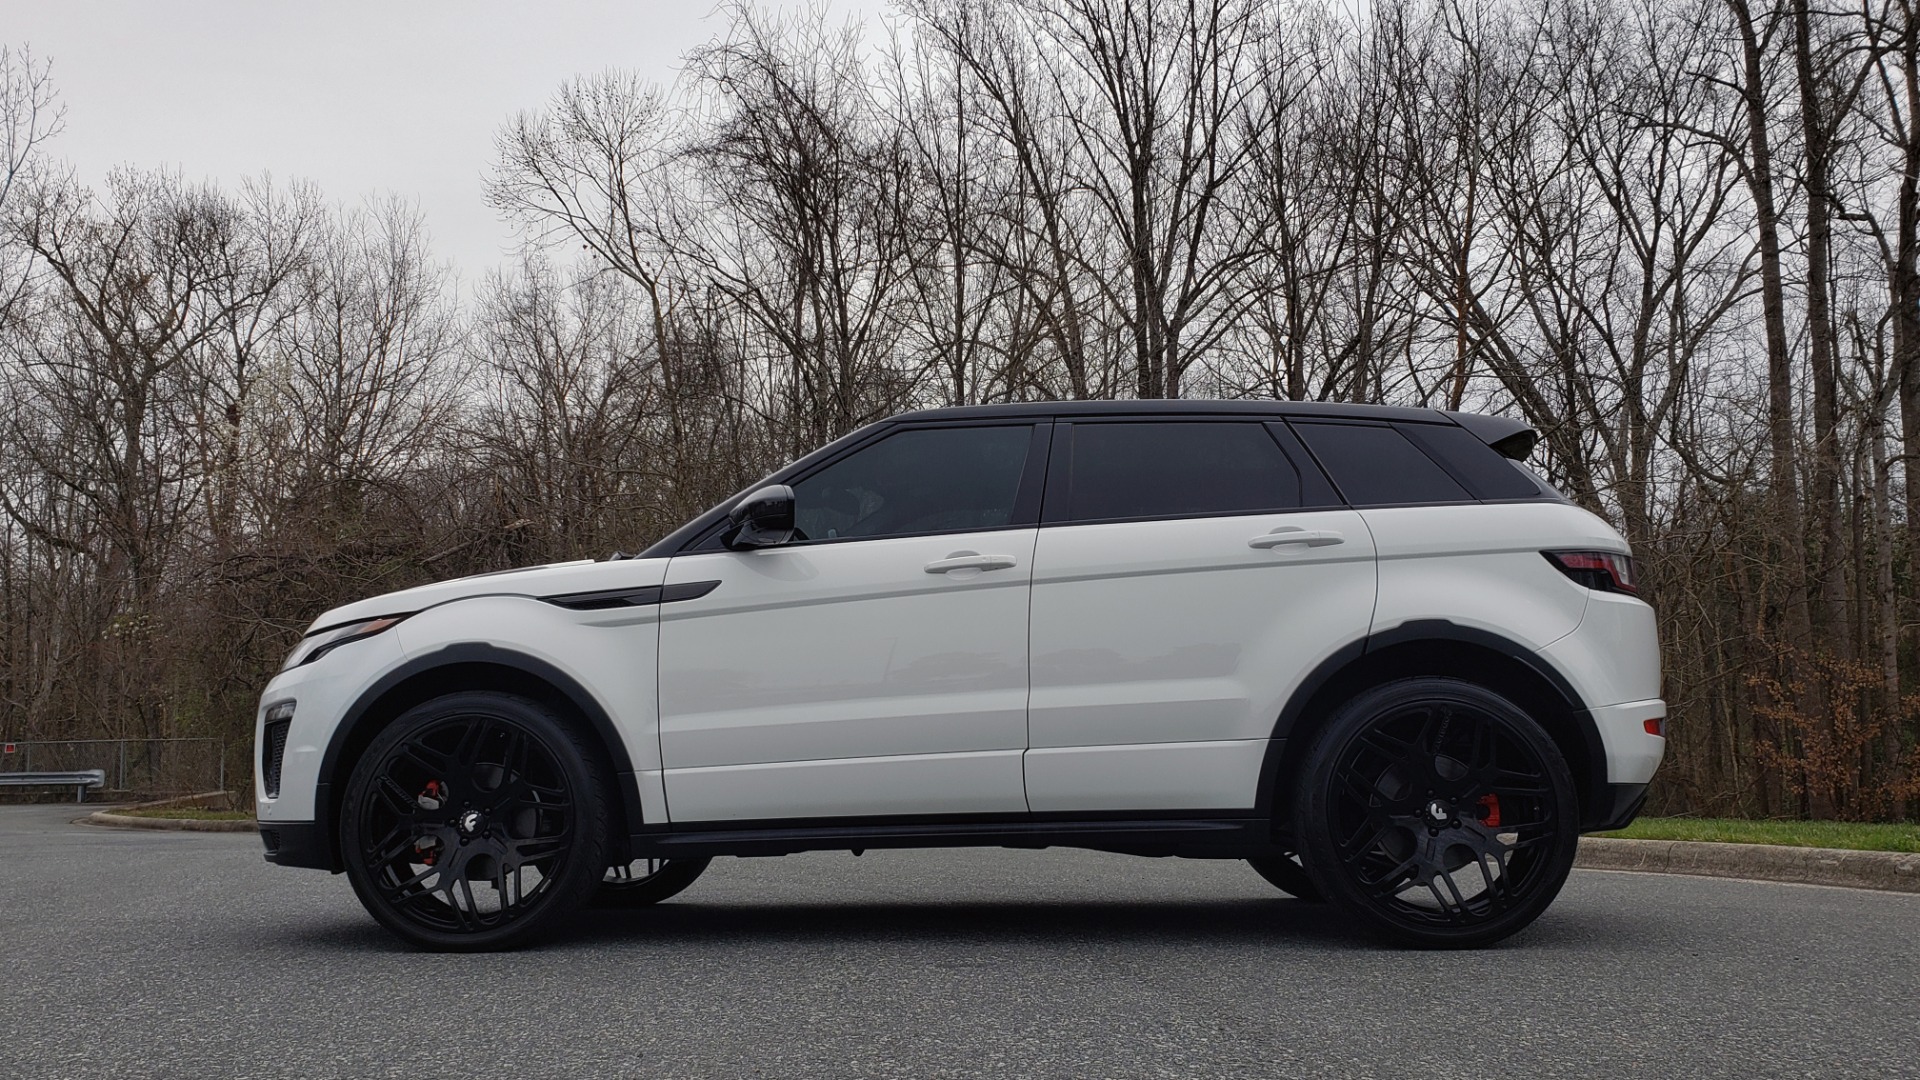 Used 2016 Land Rover RANGE ROVER EVOQUE HSE DYNAMIC / AWD / NAV / PANO-ROOF / REARVIEW / 22-IN WHEELS for sale Sold at Formula Imports in Charlotte NC 28227 3